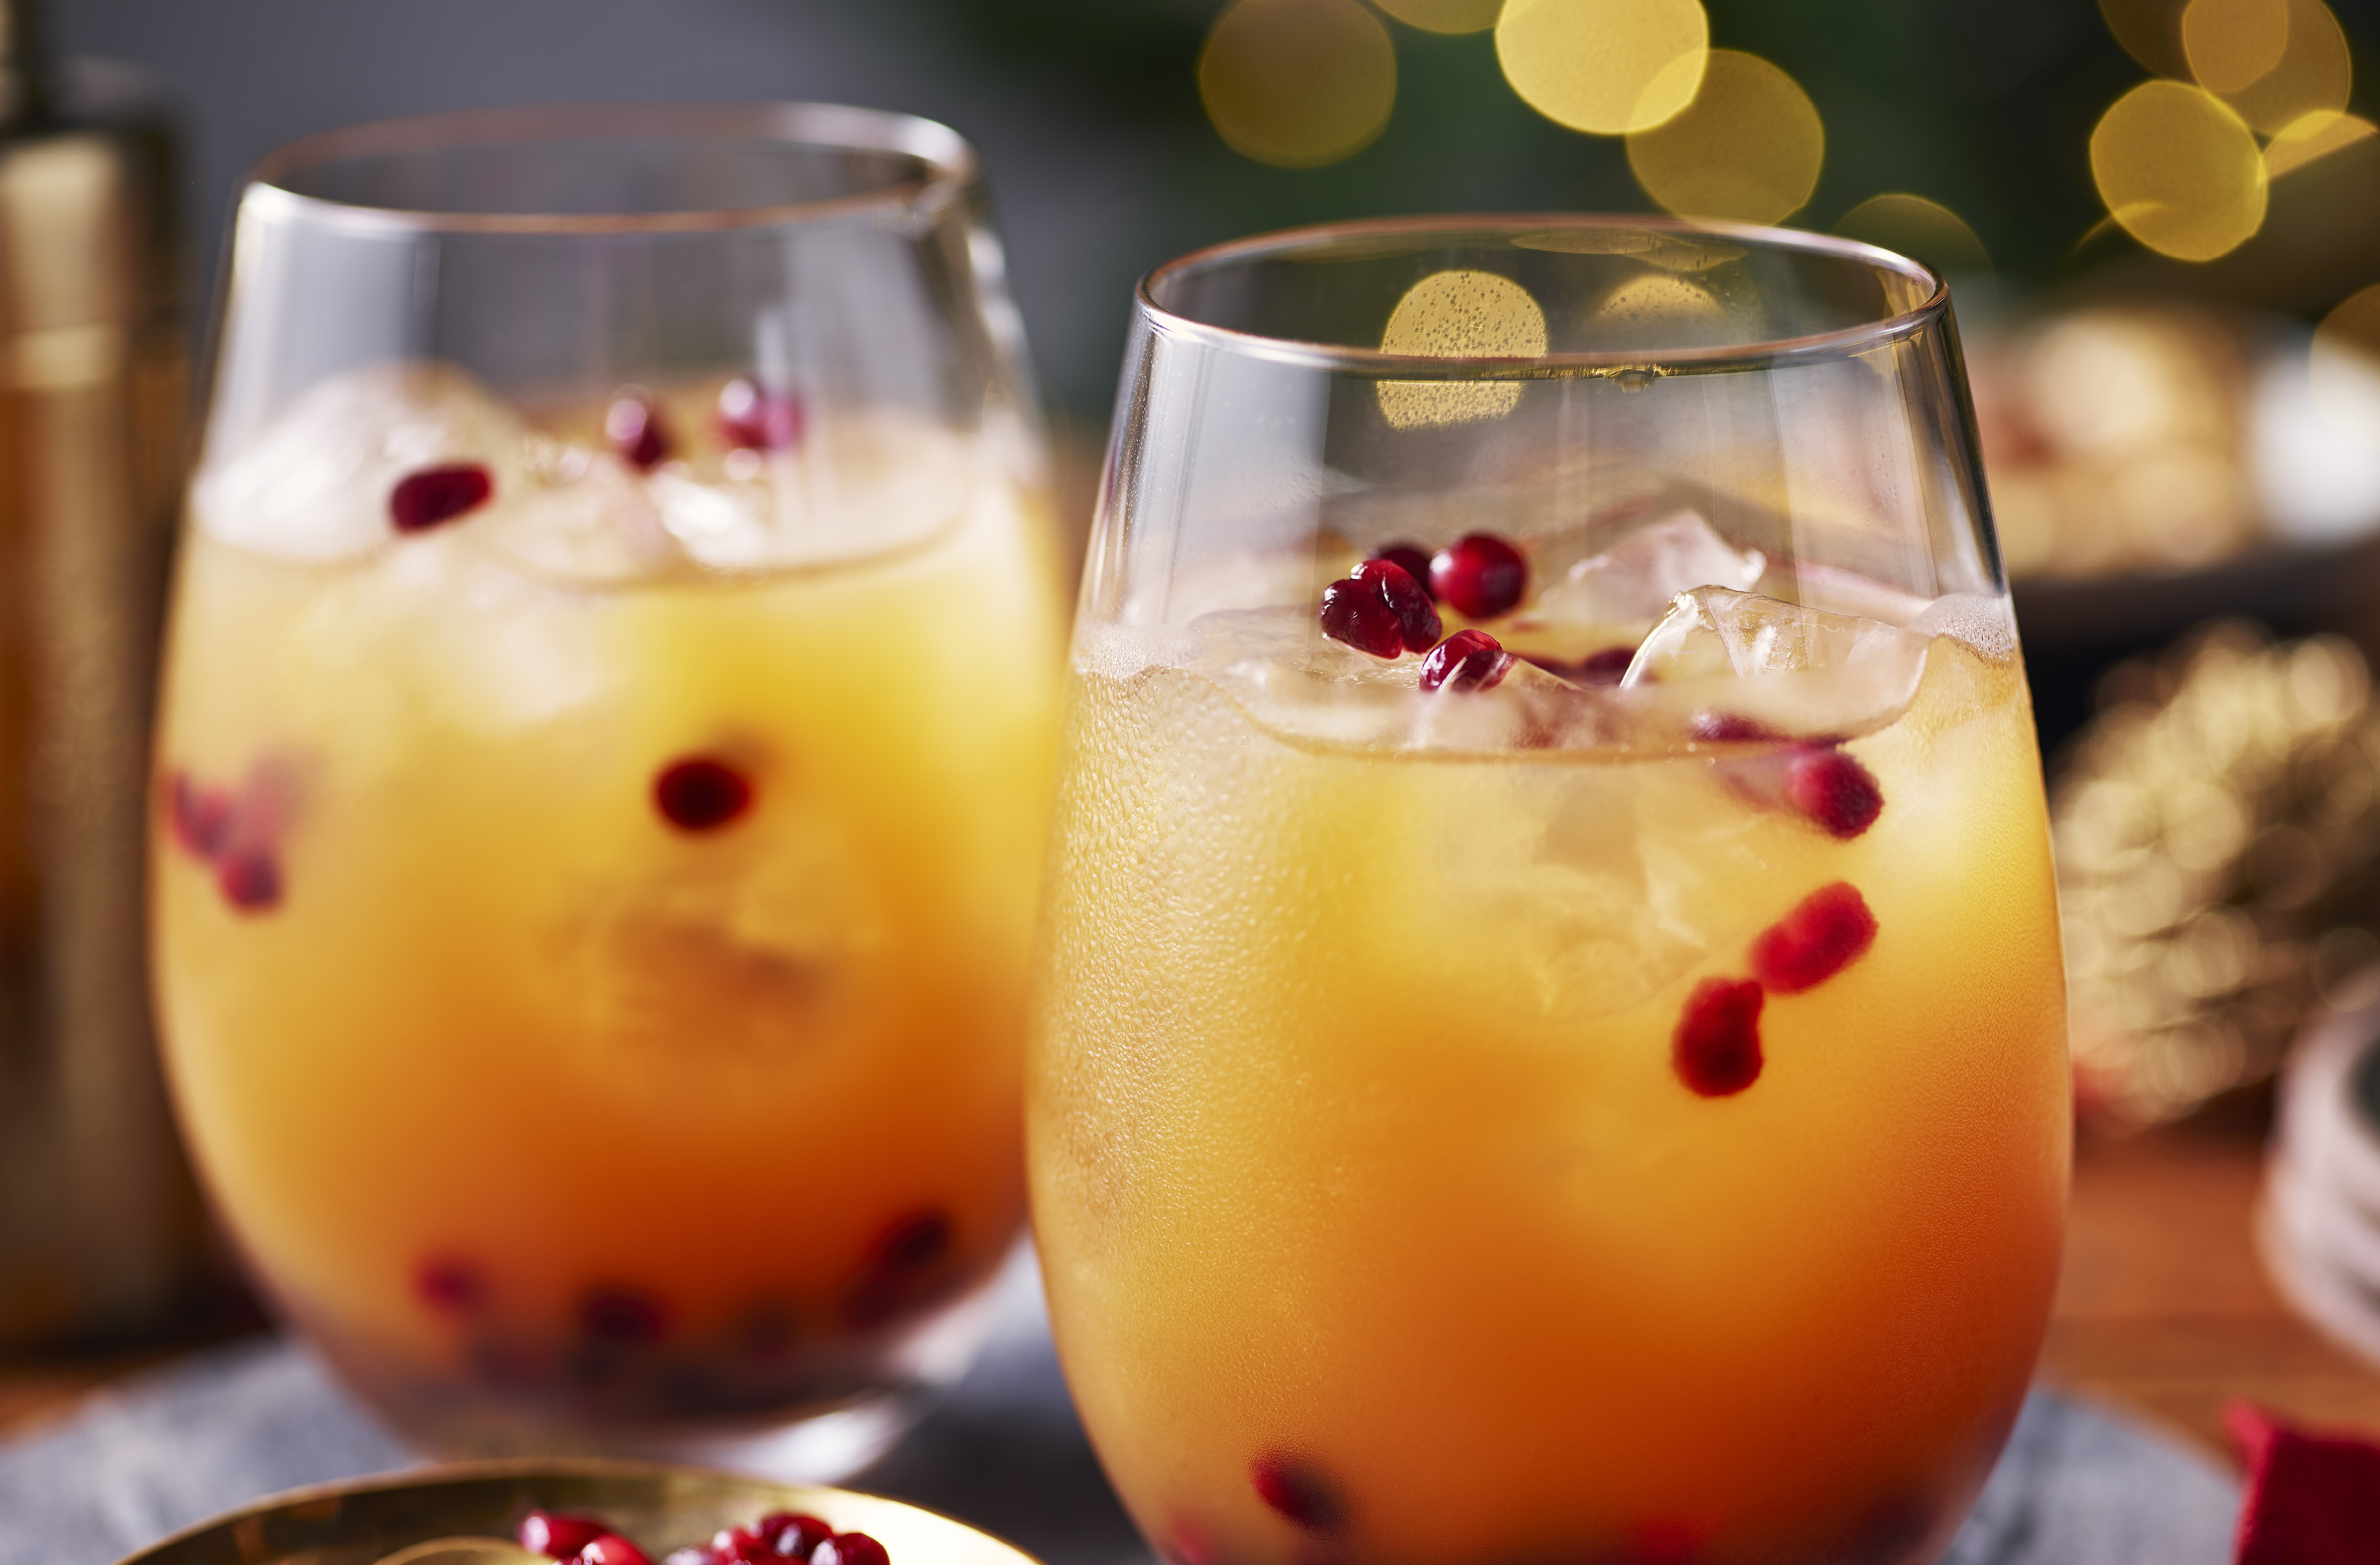 Two golden juices with ice and pomegranate seeds rest beside more seeds
